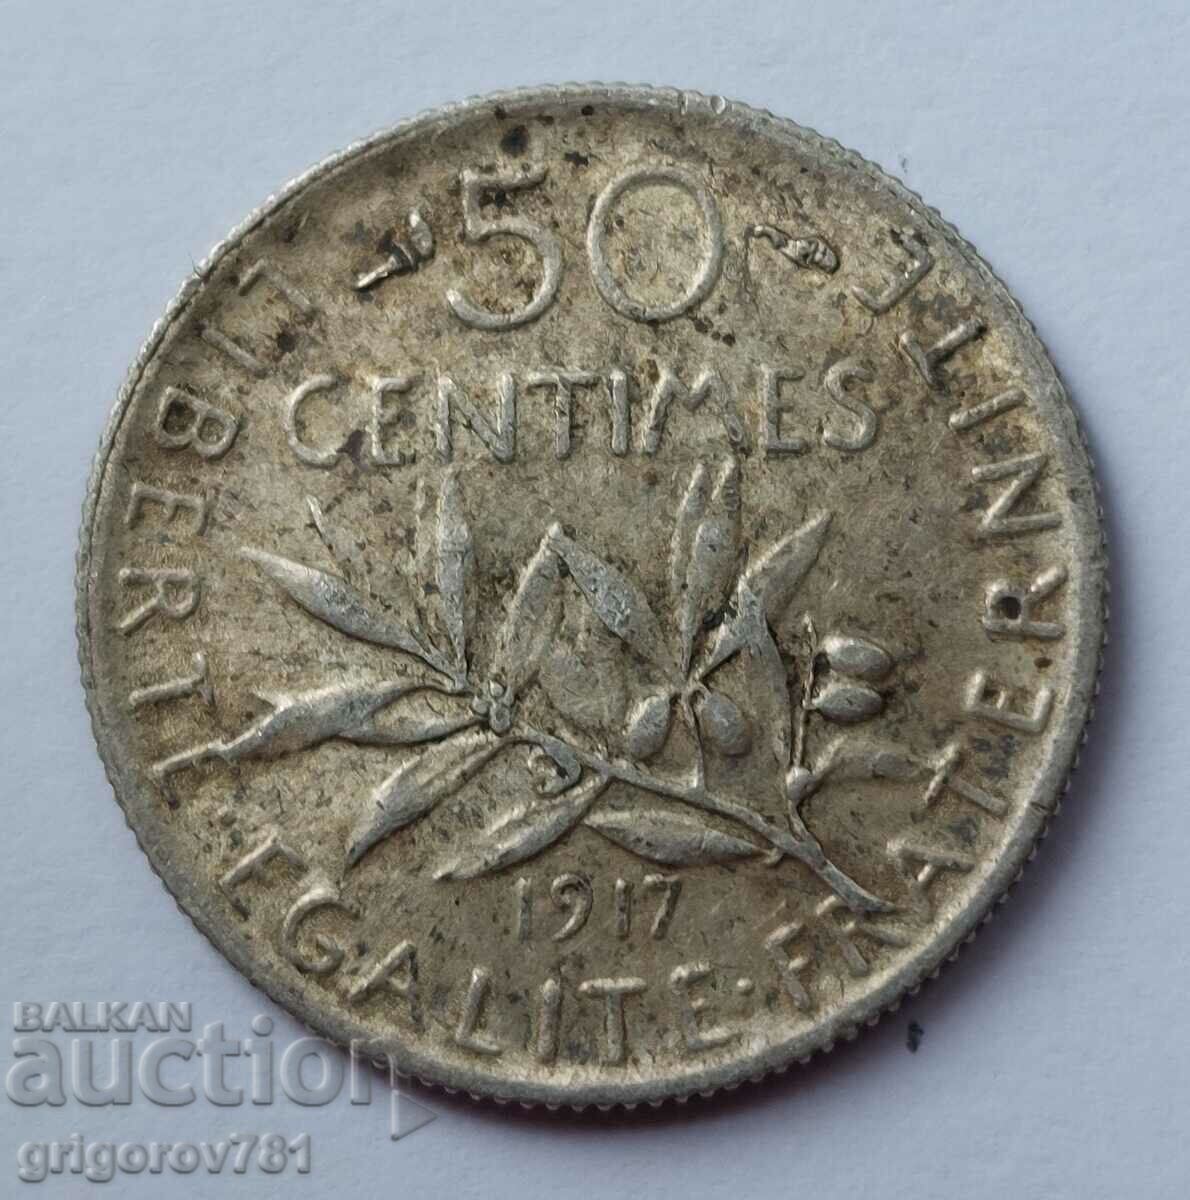 50 centimes silver France 1917 - silver coin №35